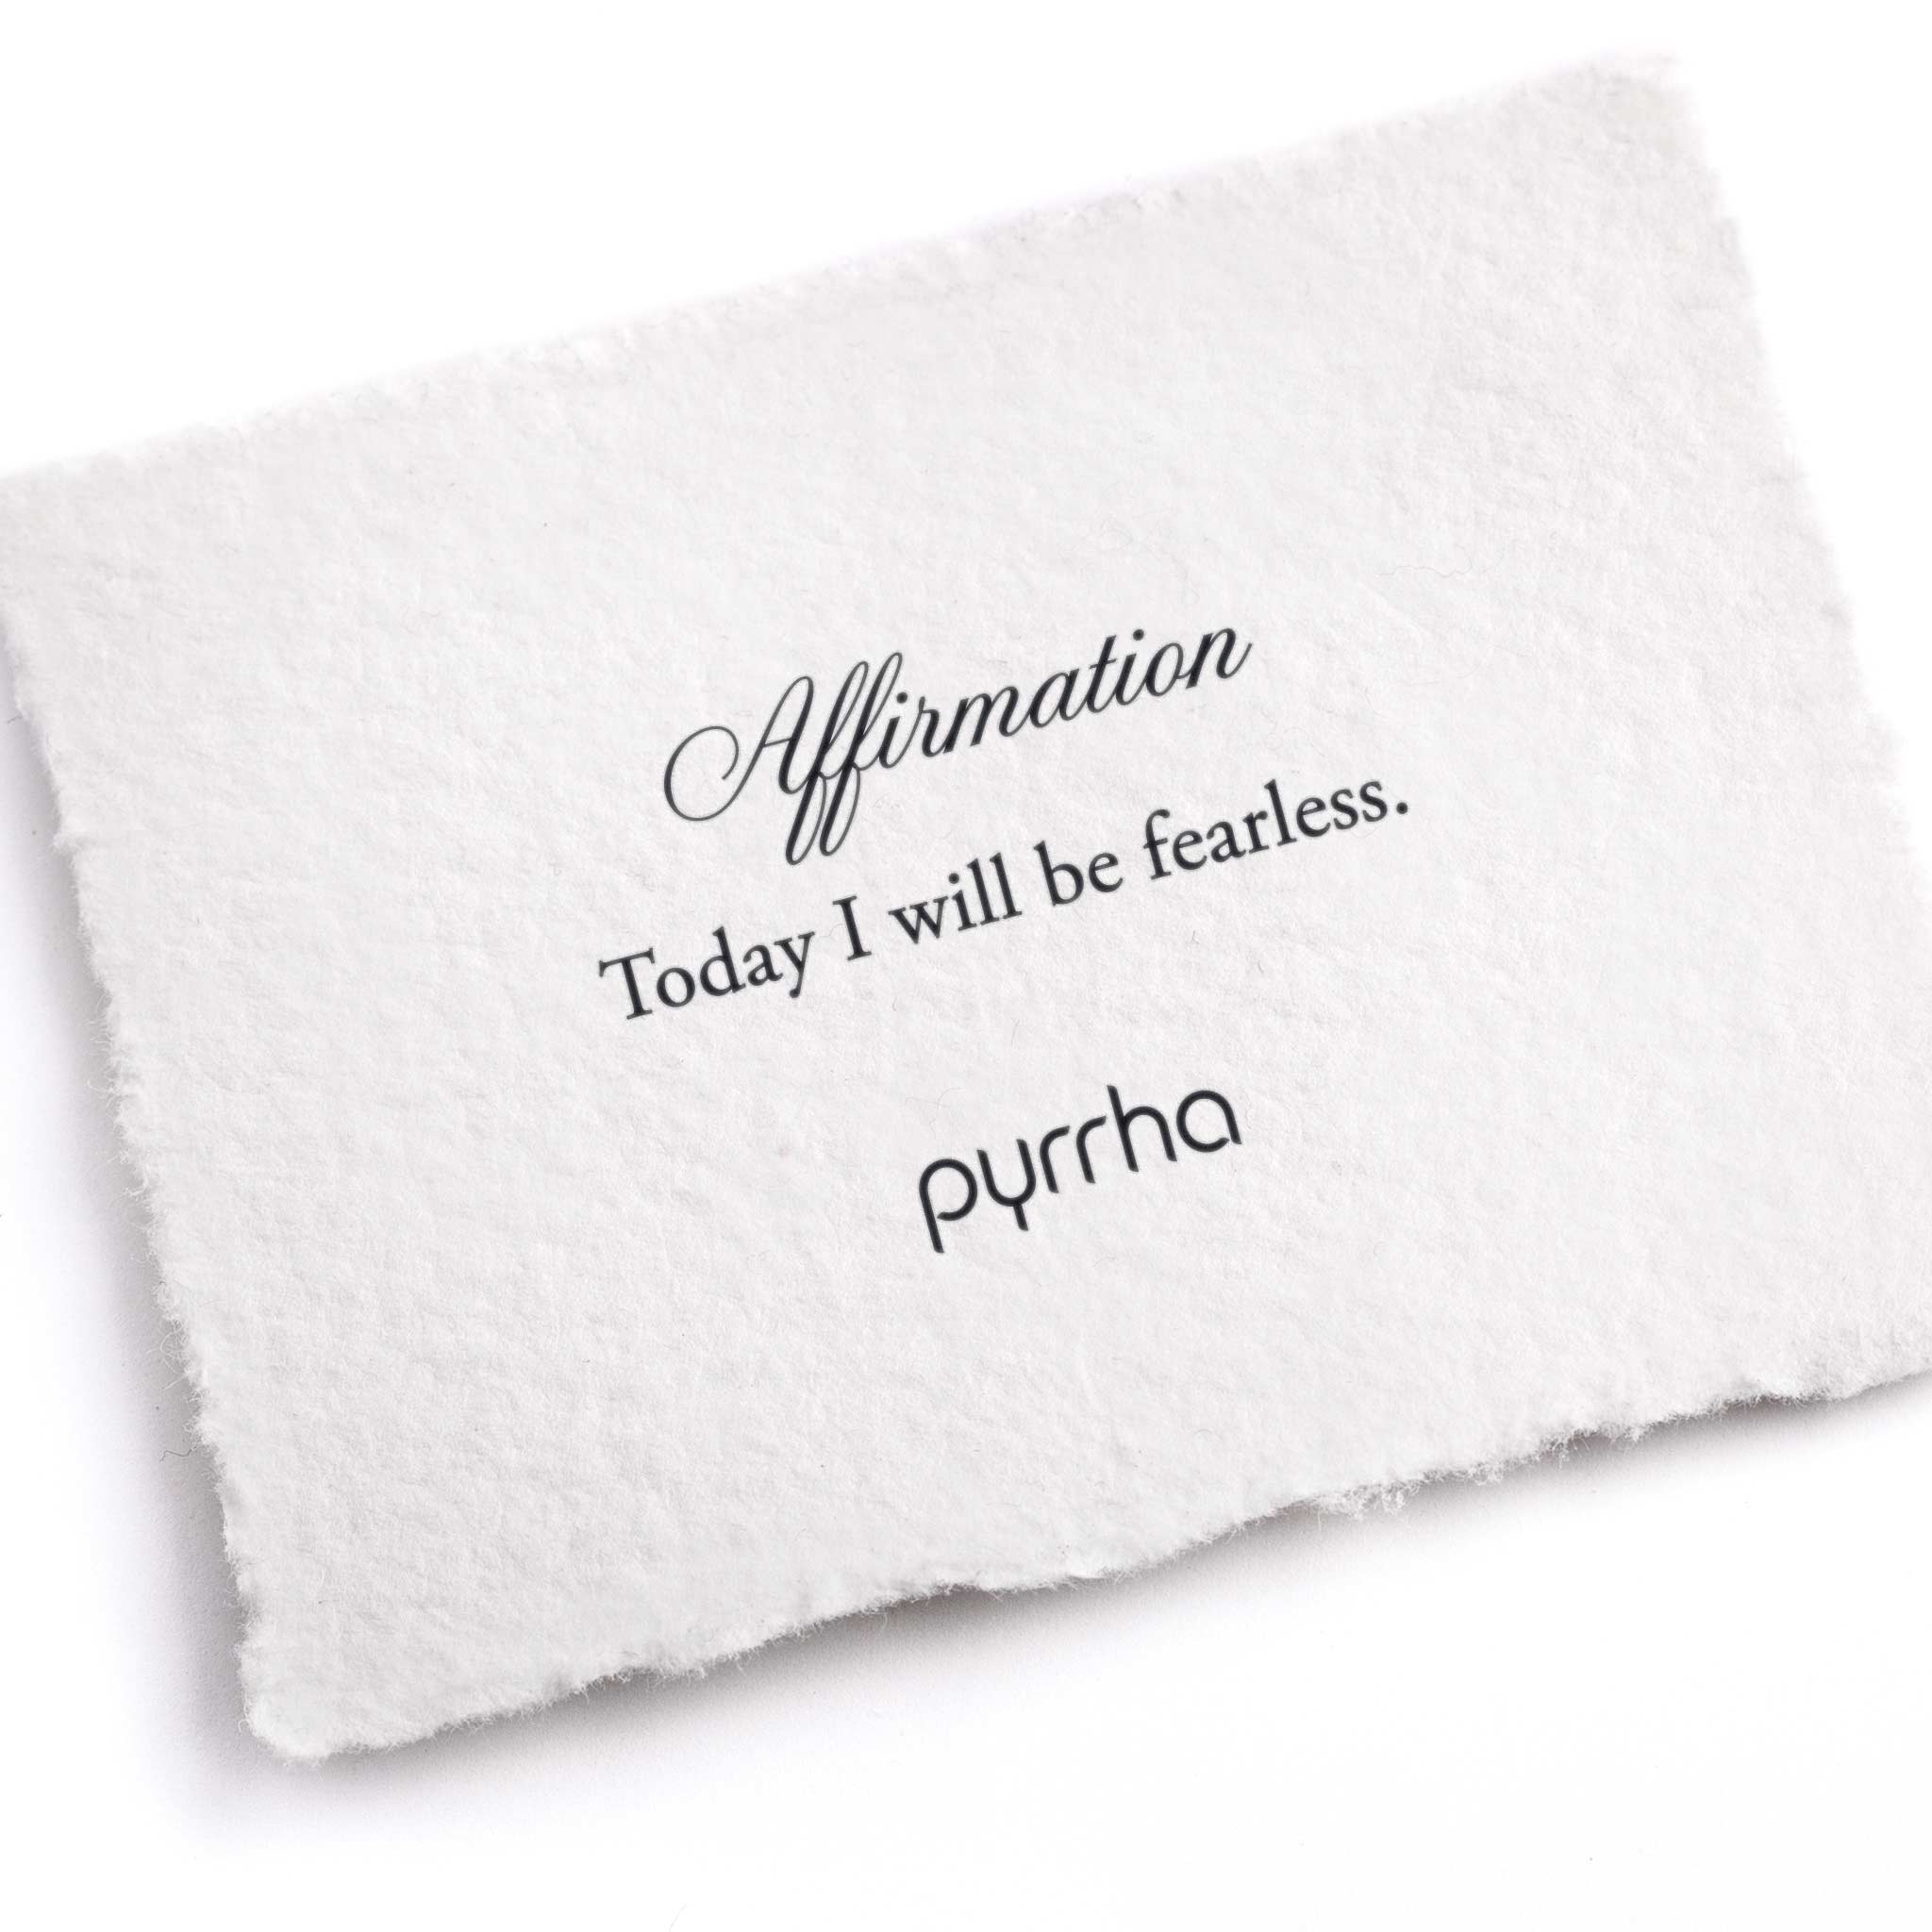 A hand-torn, letterpress printed card describing the meaning for Pyrrha's Today I Will Be Fearless Affirmation Talisman Necklace